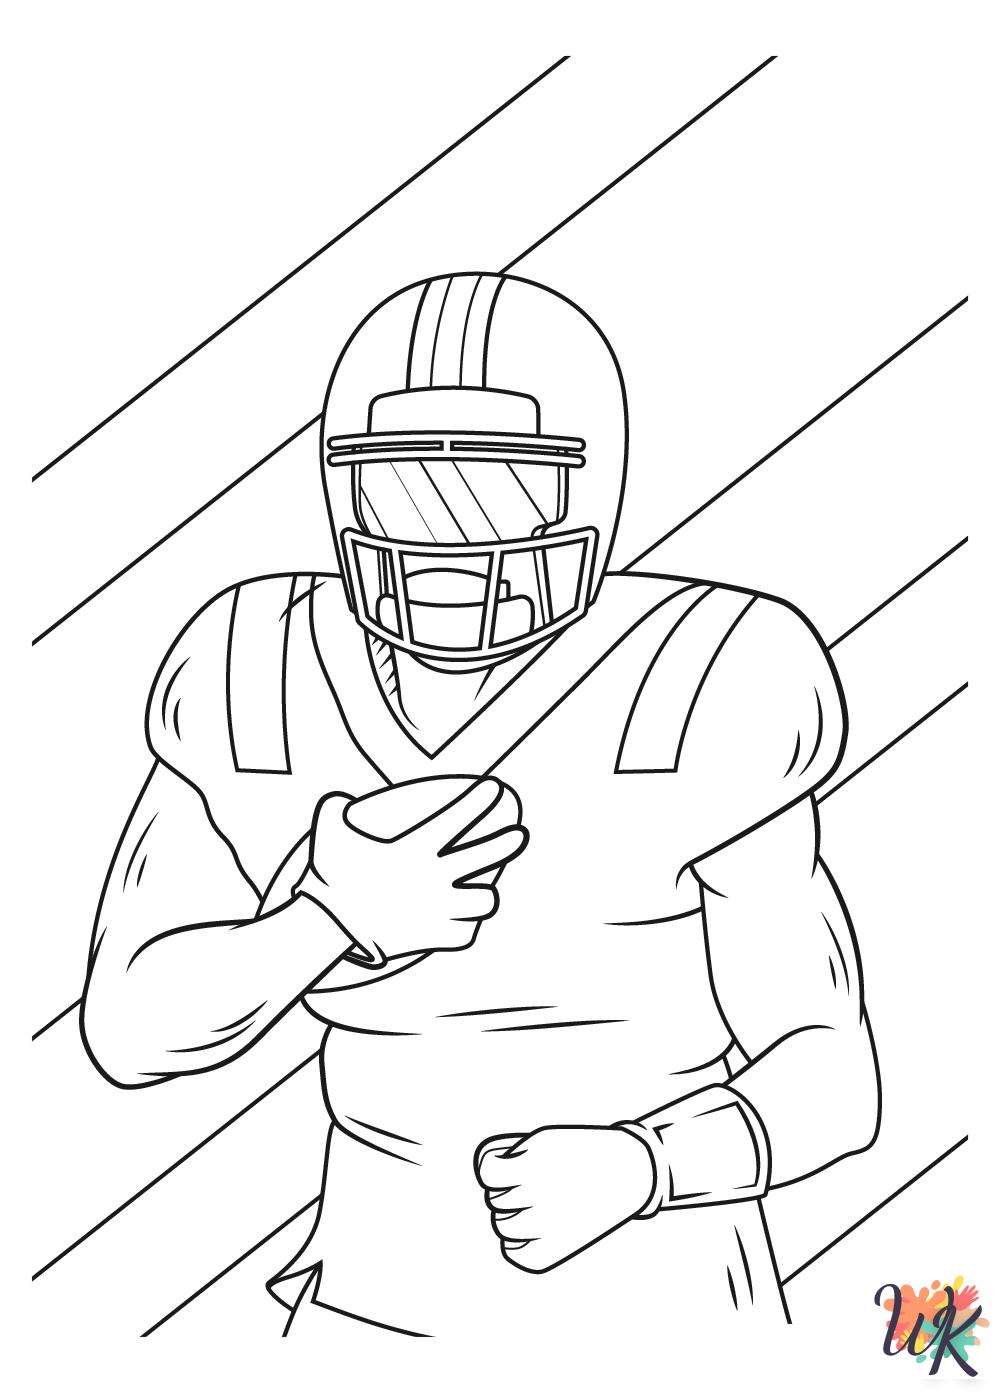 free full size printable NFL coloring pages for adults pdf